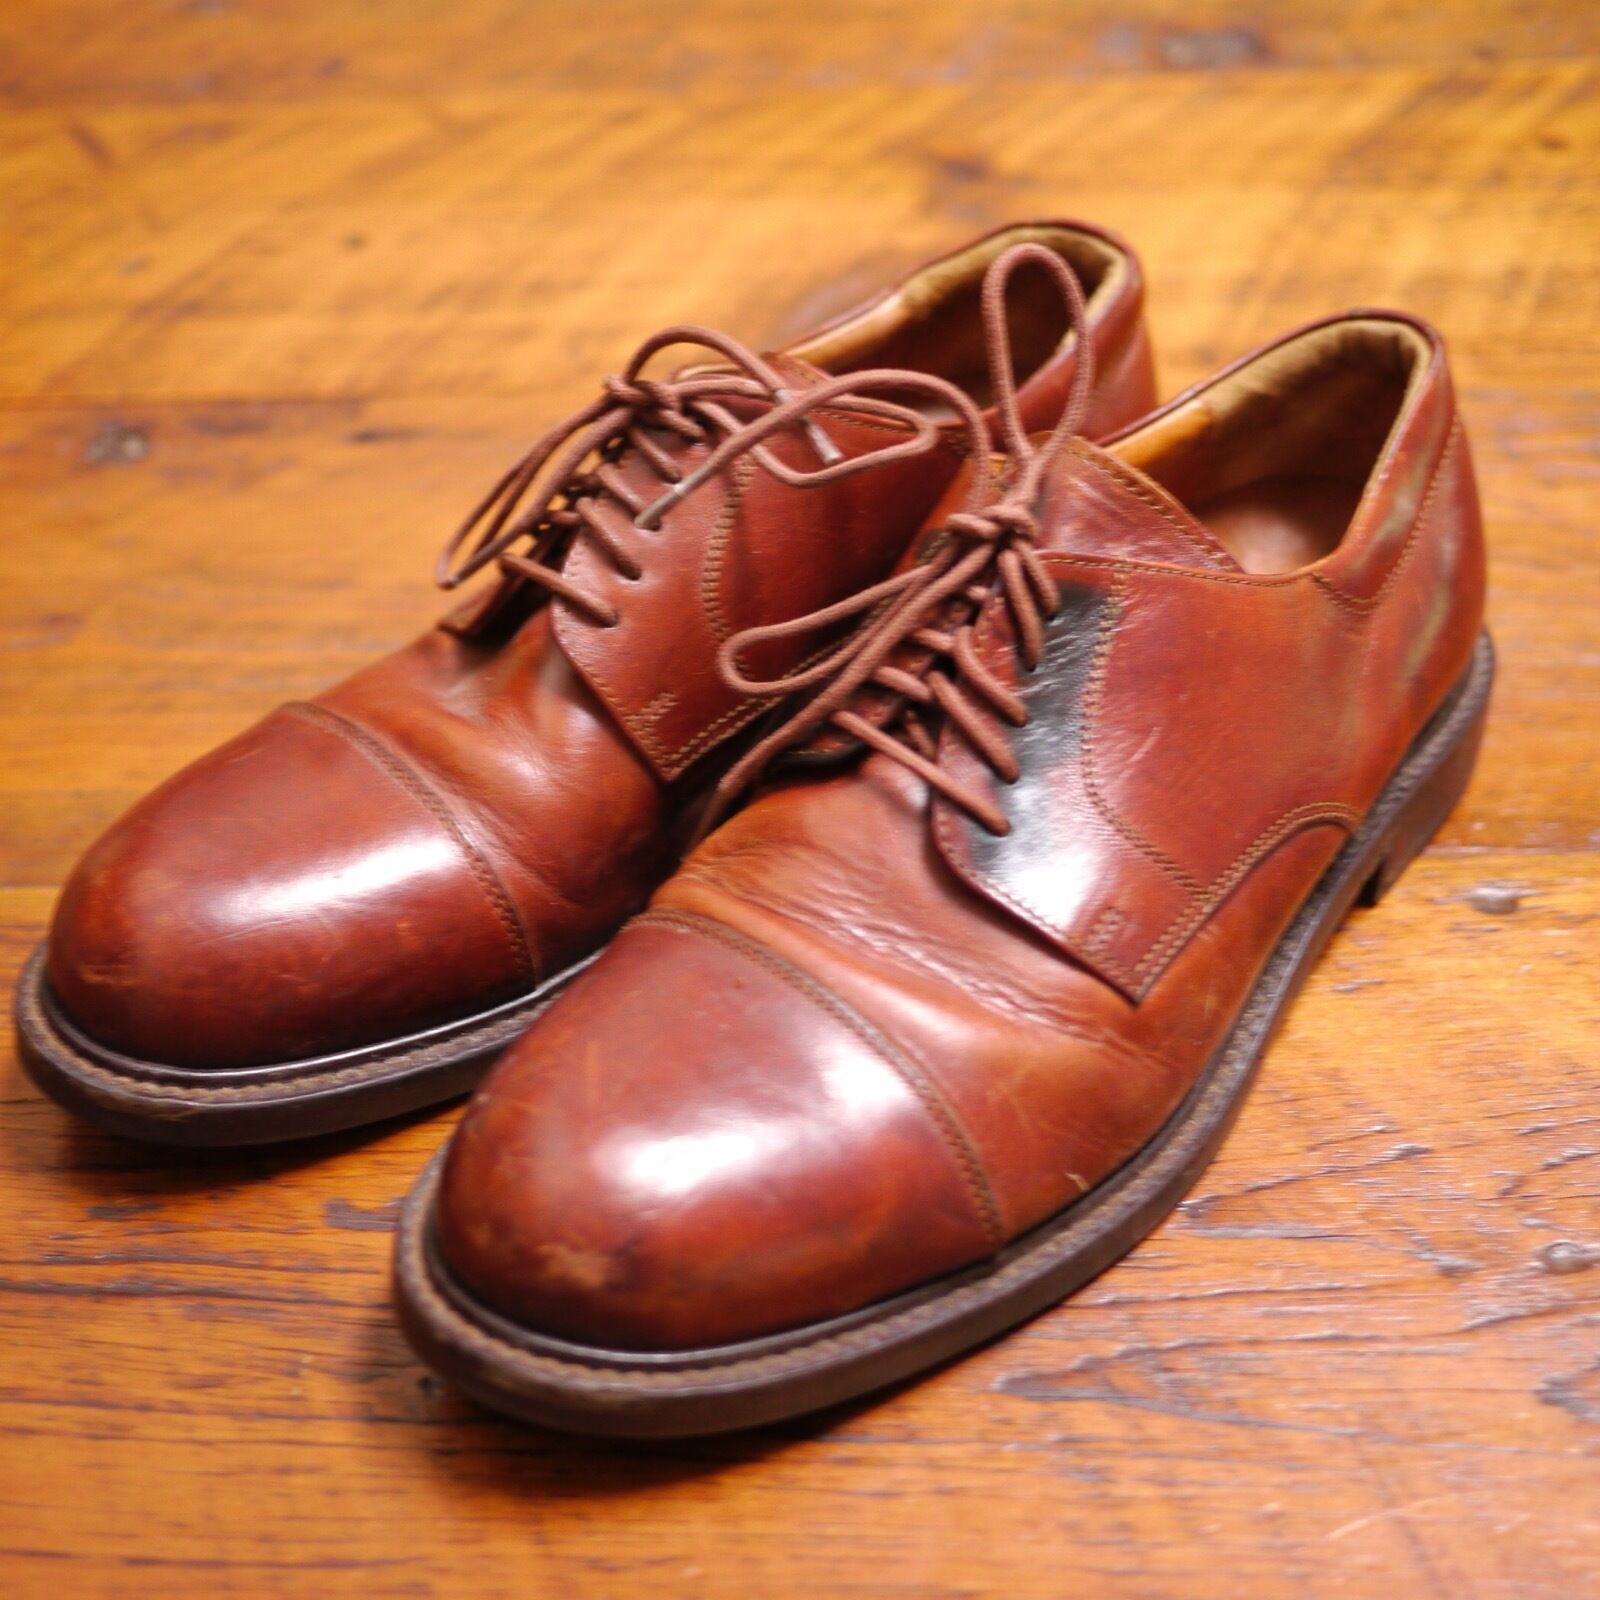 Primary image for JOHNSTON & MURPHY Made in Italy Brown Leather Cap Toe Dress Shoes 9 42.5